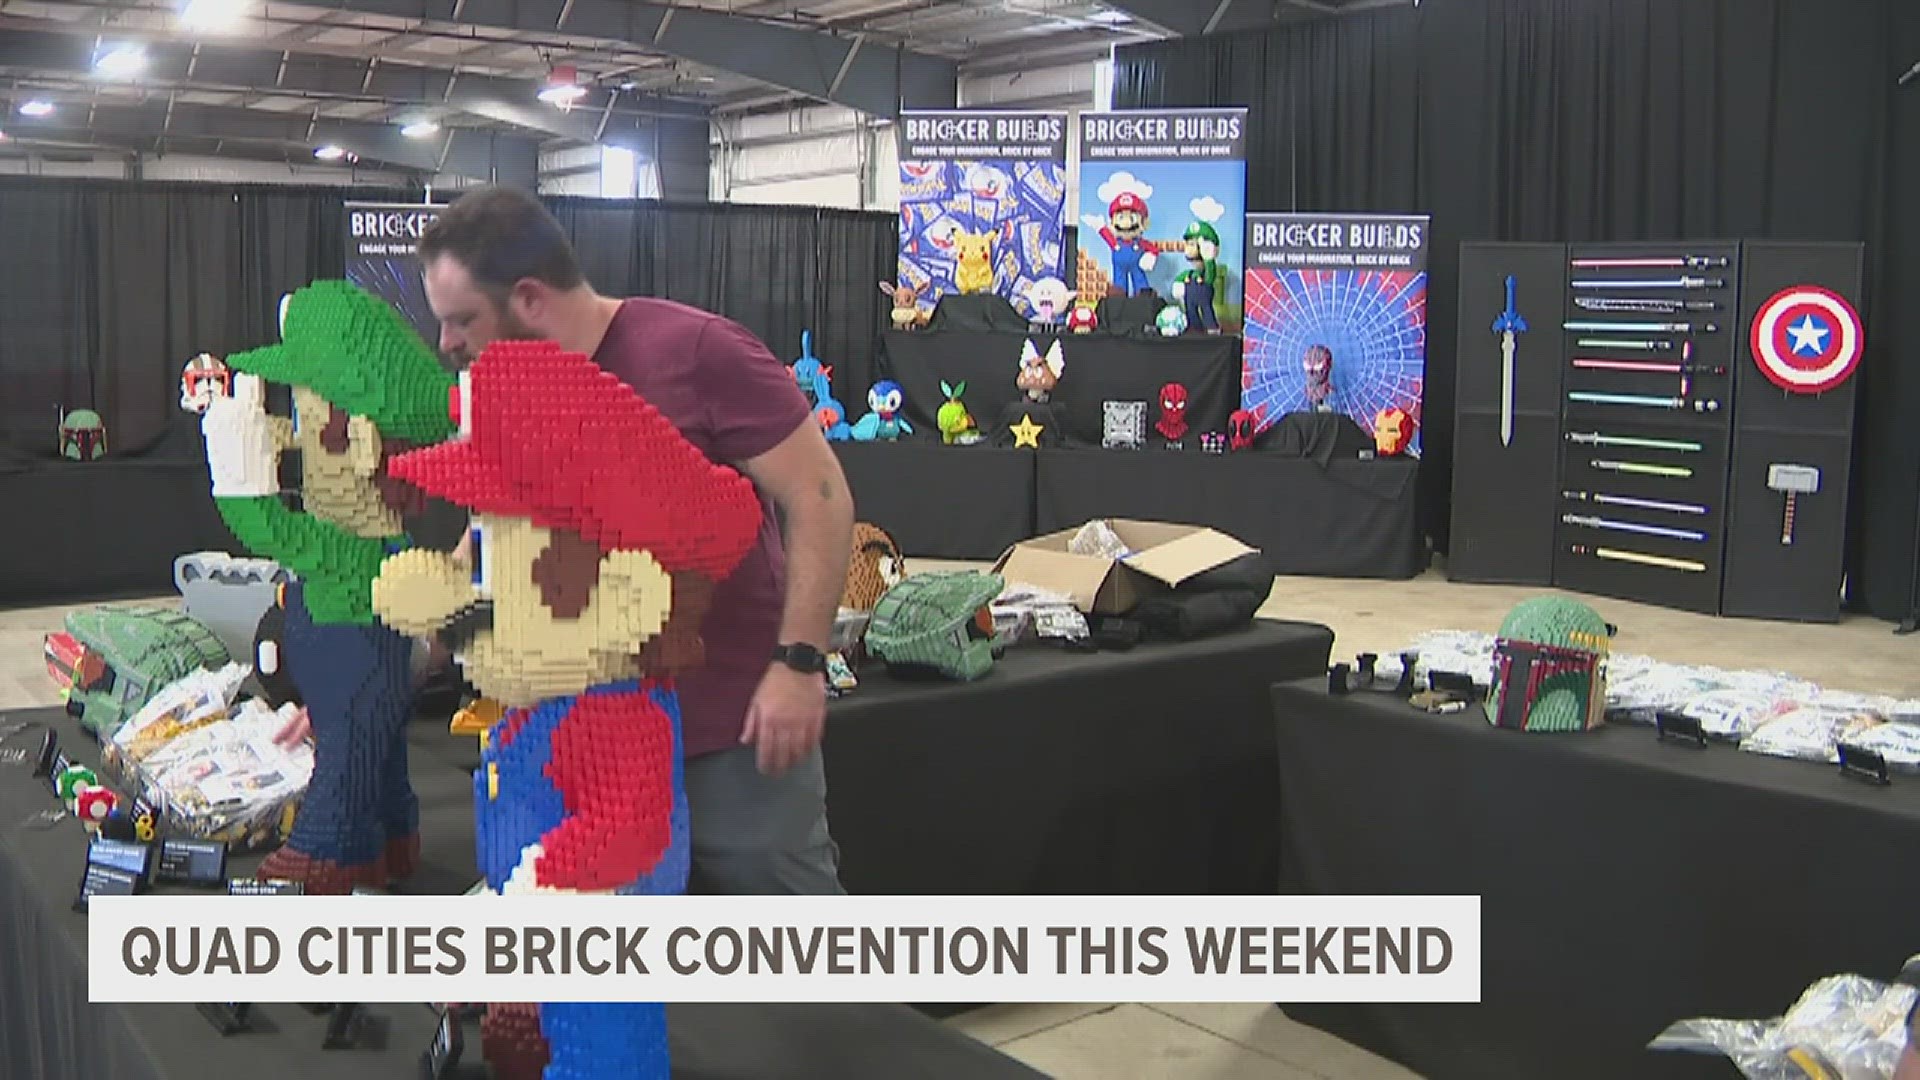 The QC Brick Convention will be taking place Saturday and Sunday at the Mississippi Valley Fairgrounds.